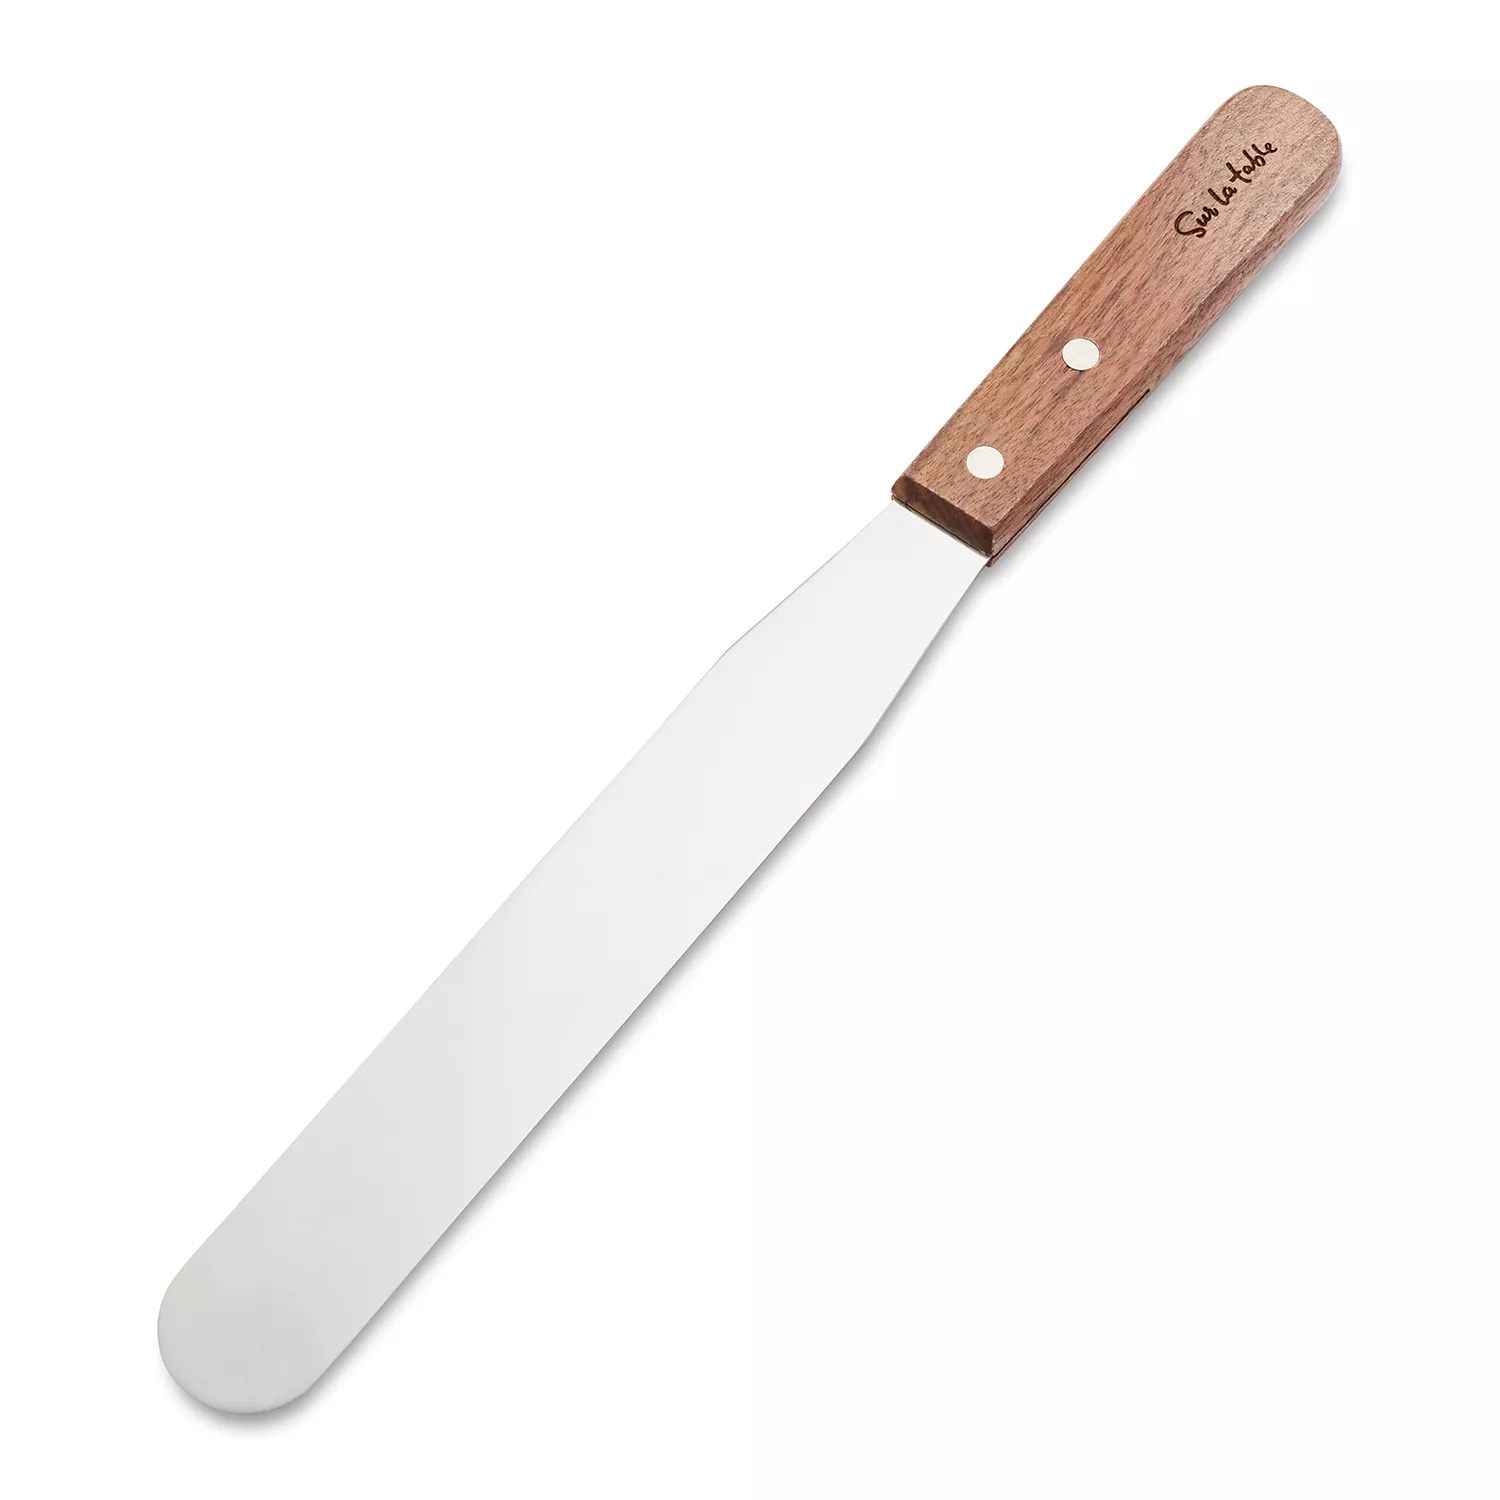 Newborn Brothers Co., Inc. Wooden Handle Wide Spatula Kit